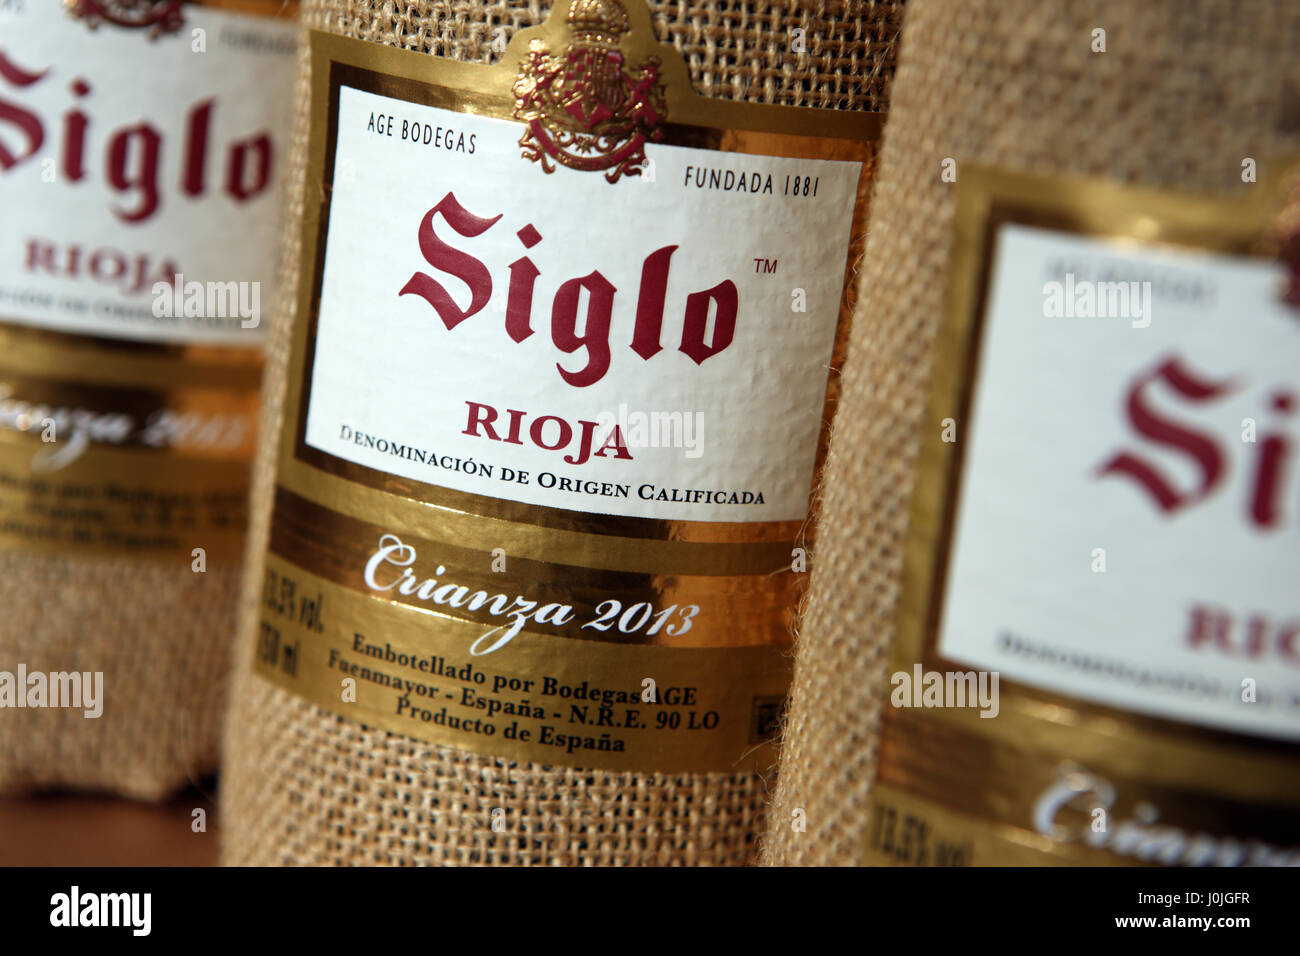 Bottles of Spanish Rioja from the Siglo winery Stock Photo